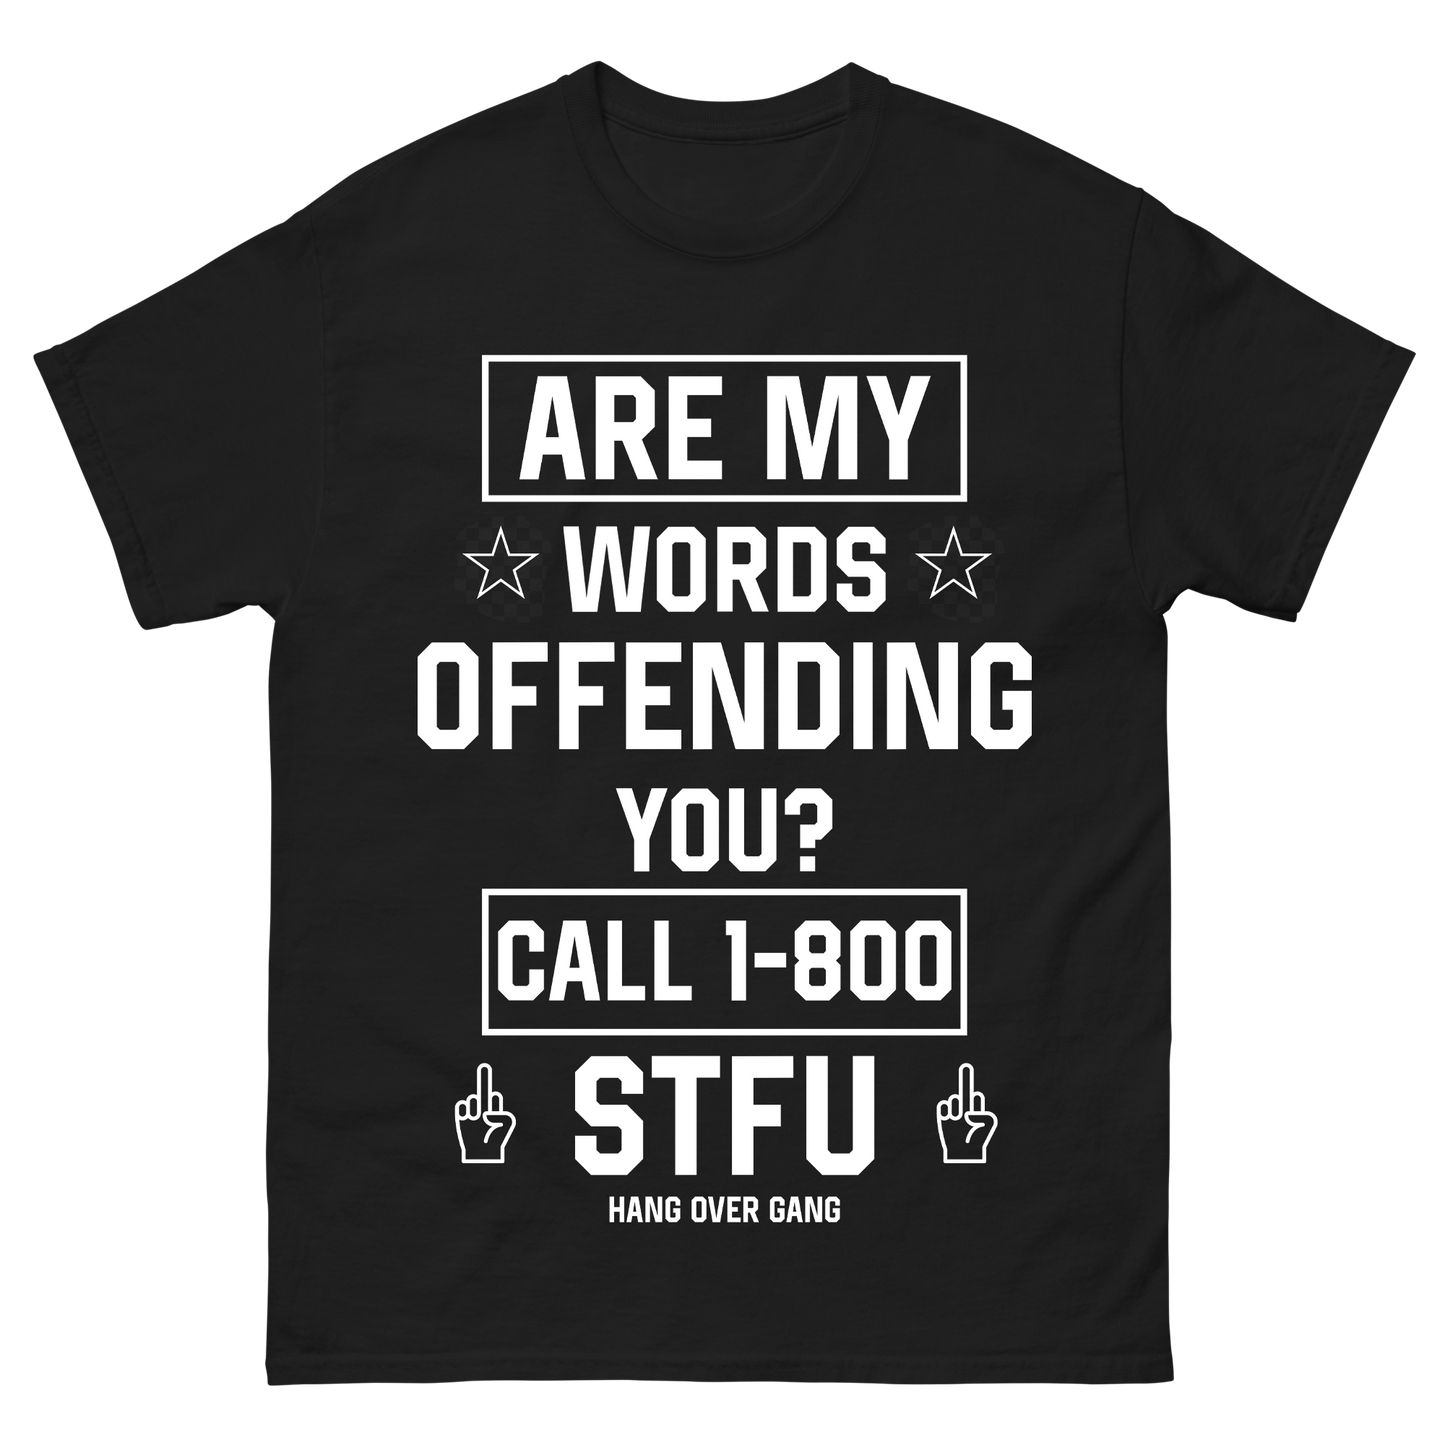 "Are My Words Offending You?" T-Shirt